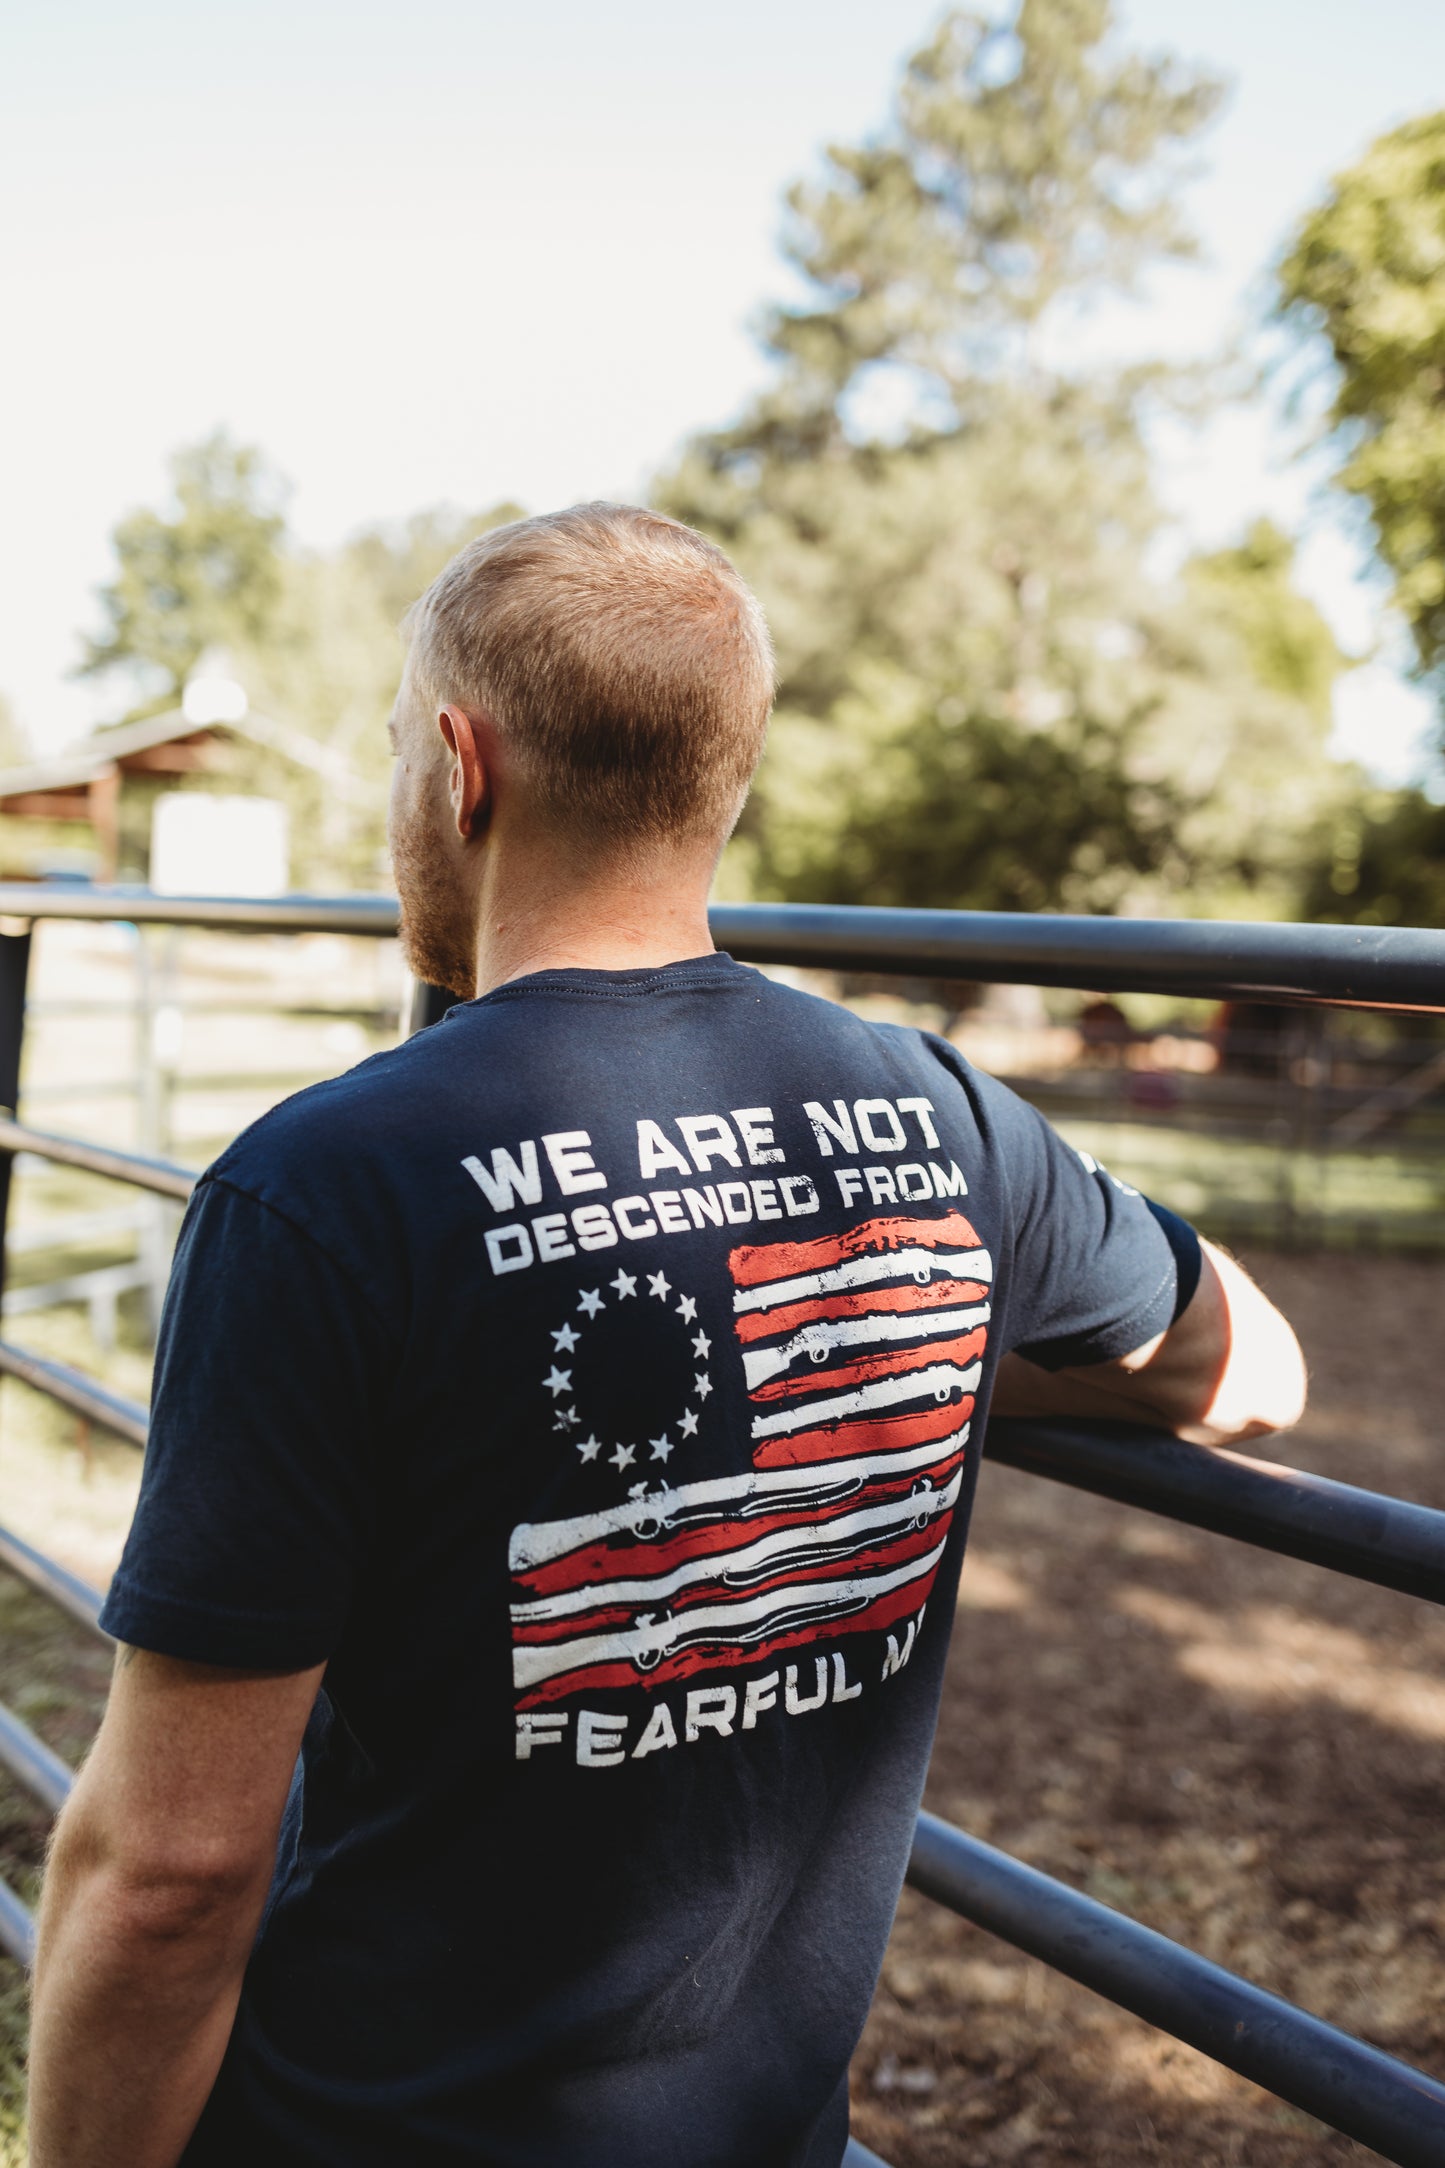 We Are Not Descended From Fearful Men tshirt